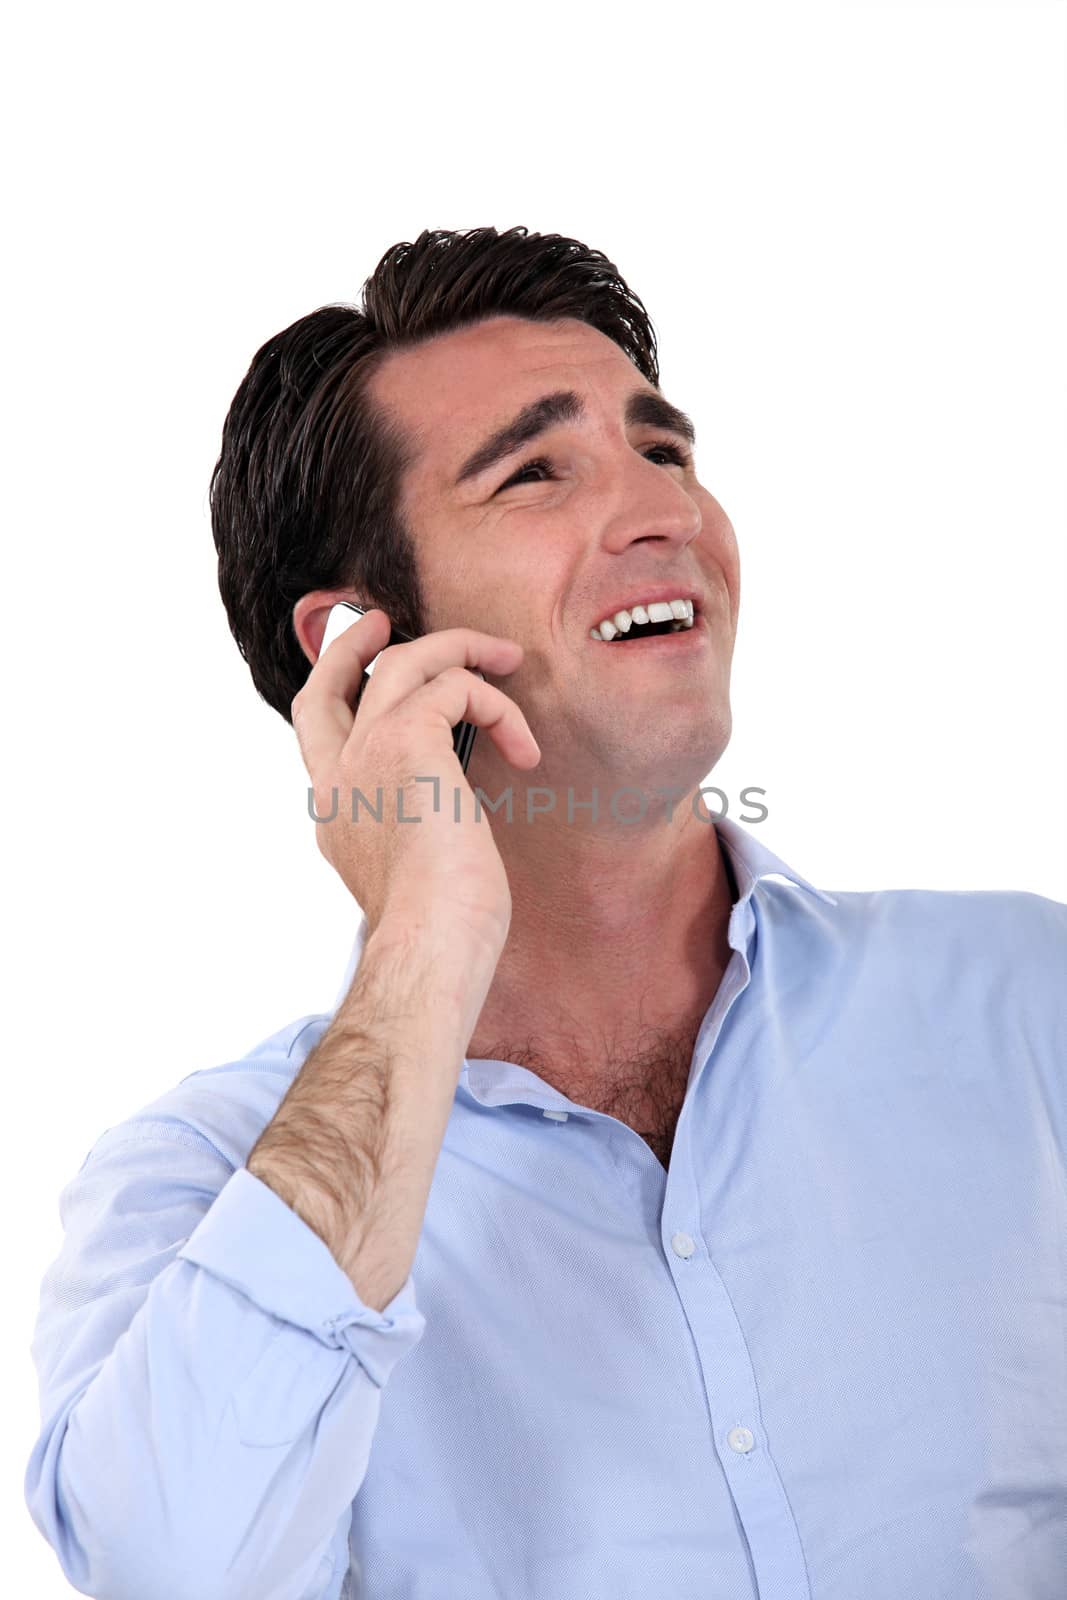 A businessman laughing over the phone.